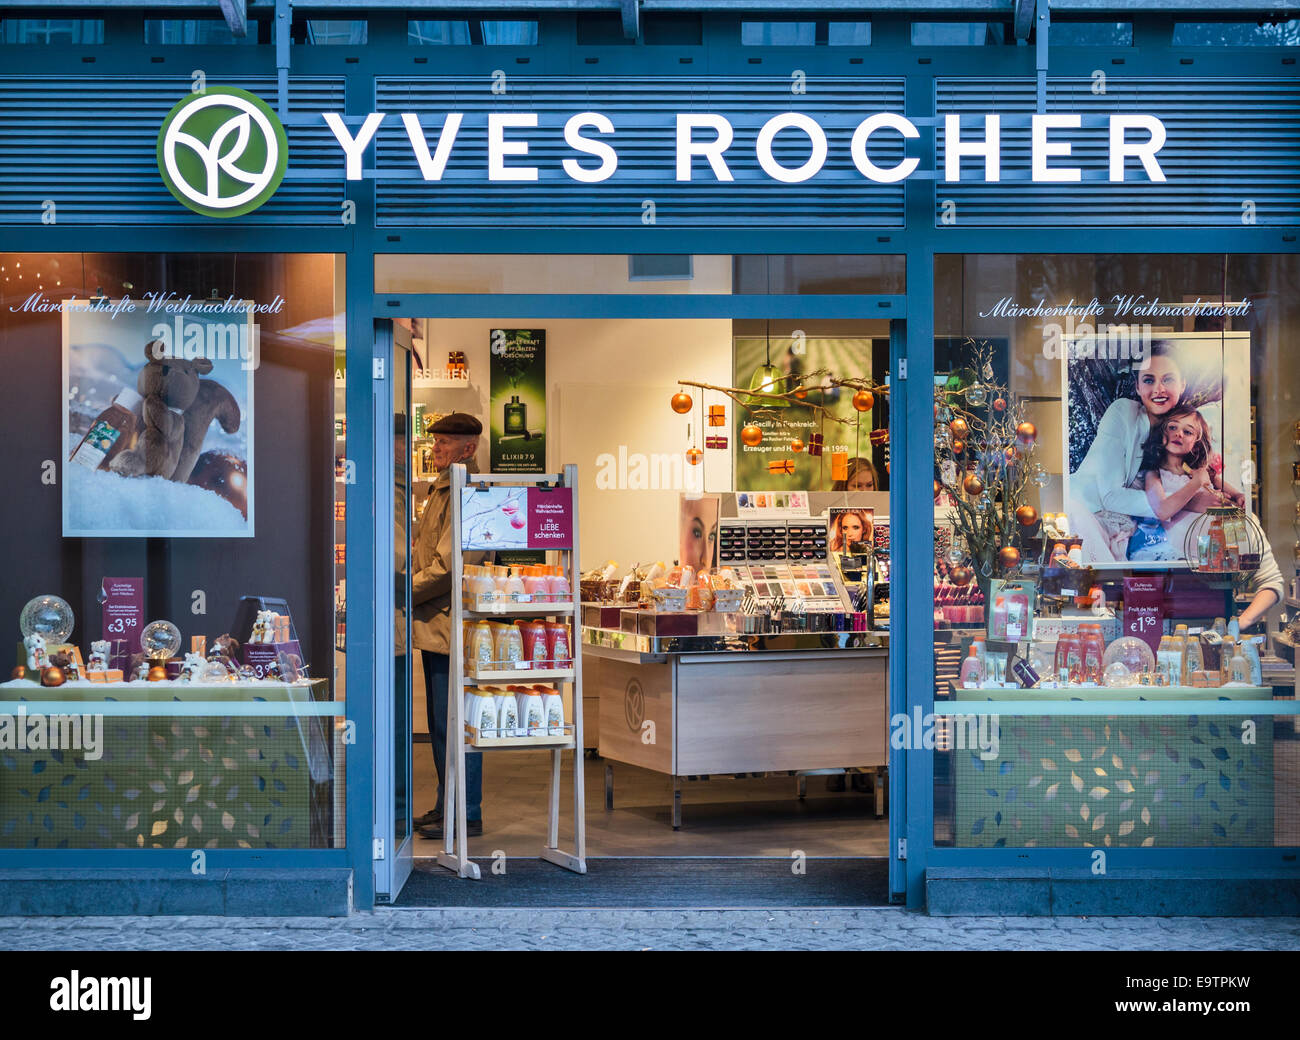 Yves Rocher store front in Germany Stock Photo